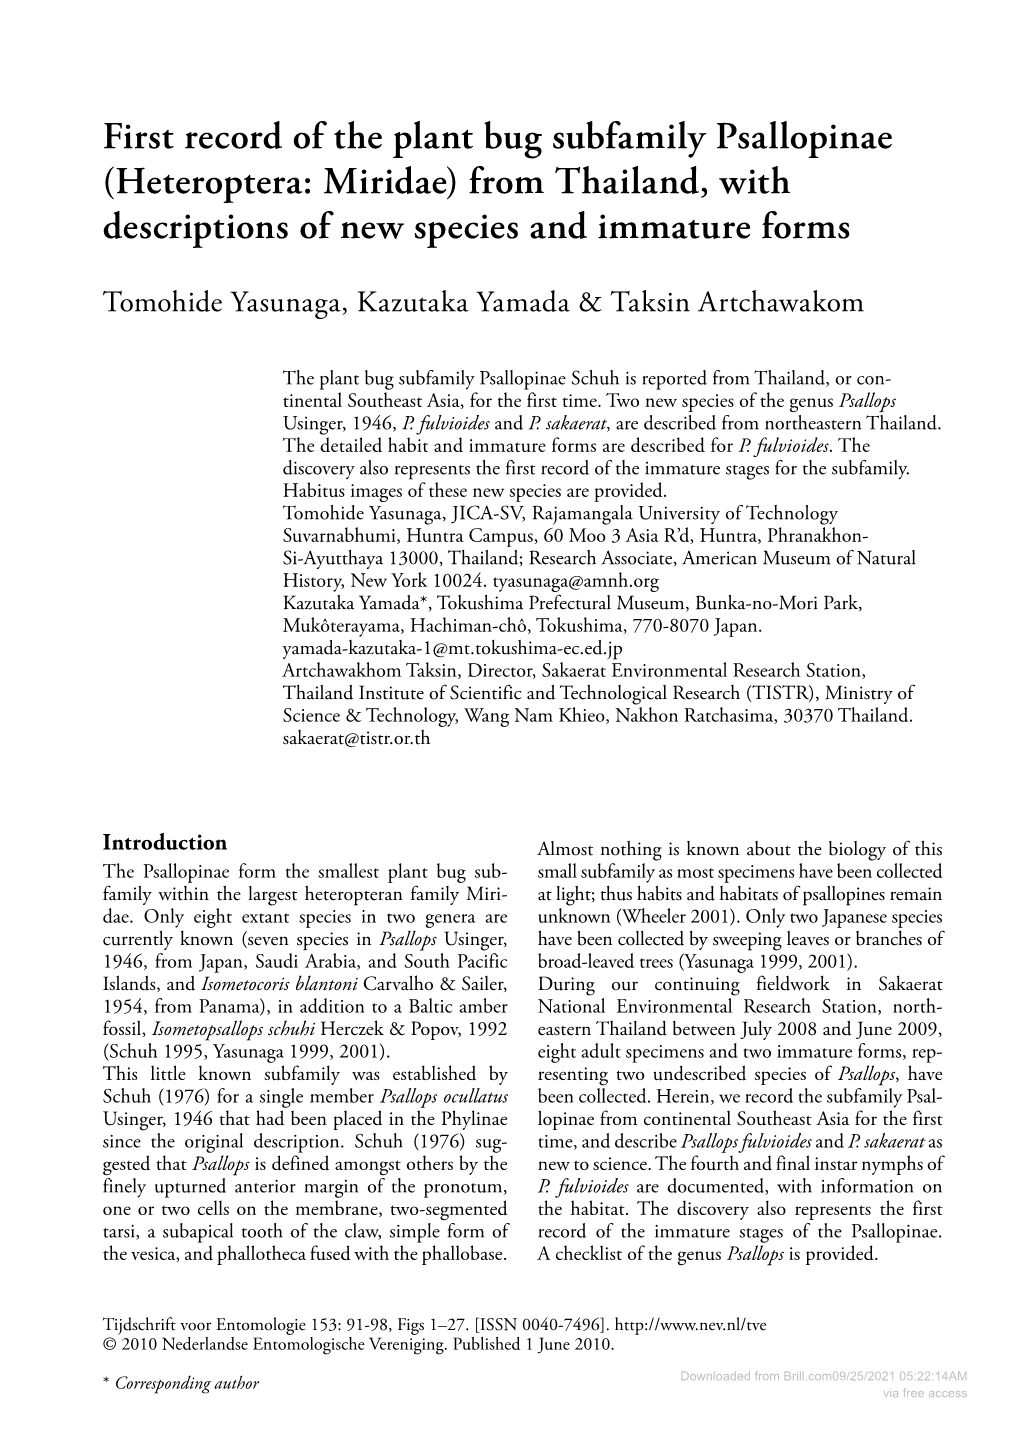 Heteroptera: Miridae) from Thailand, with Descriptions of New Species and Immature Forms